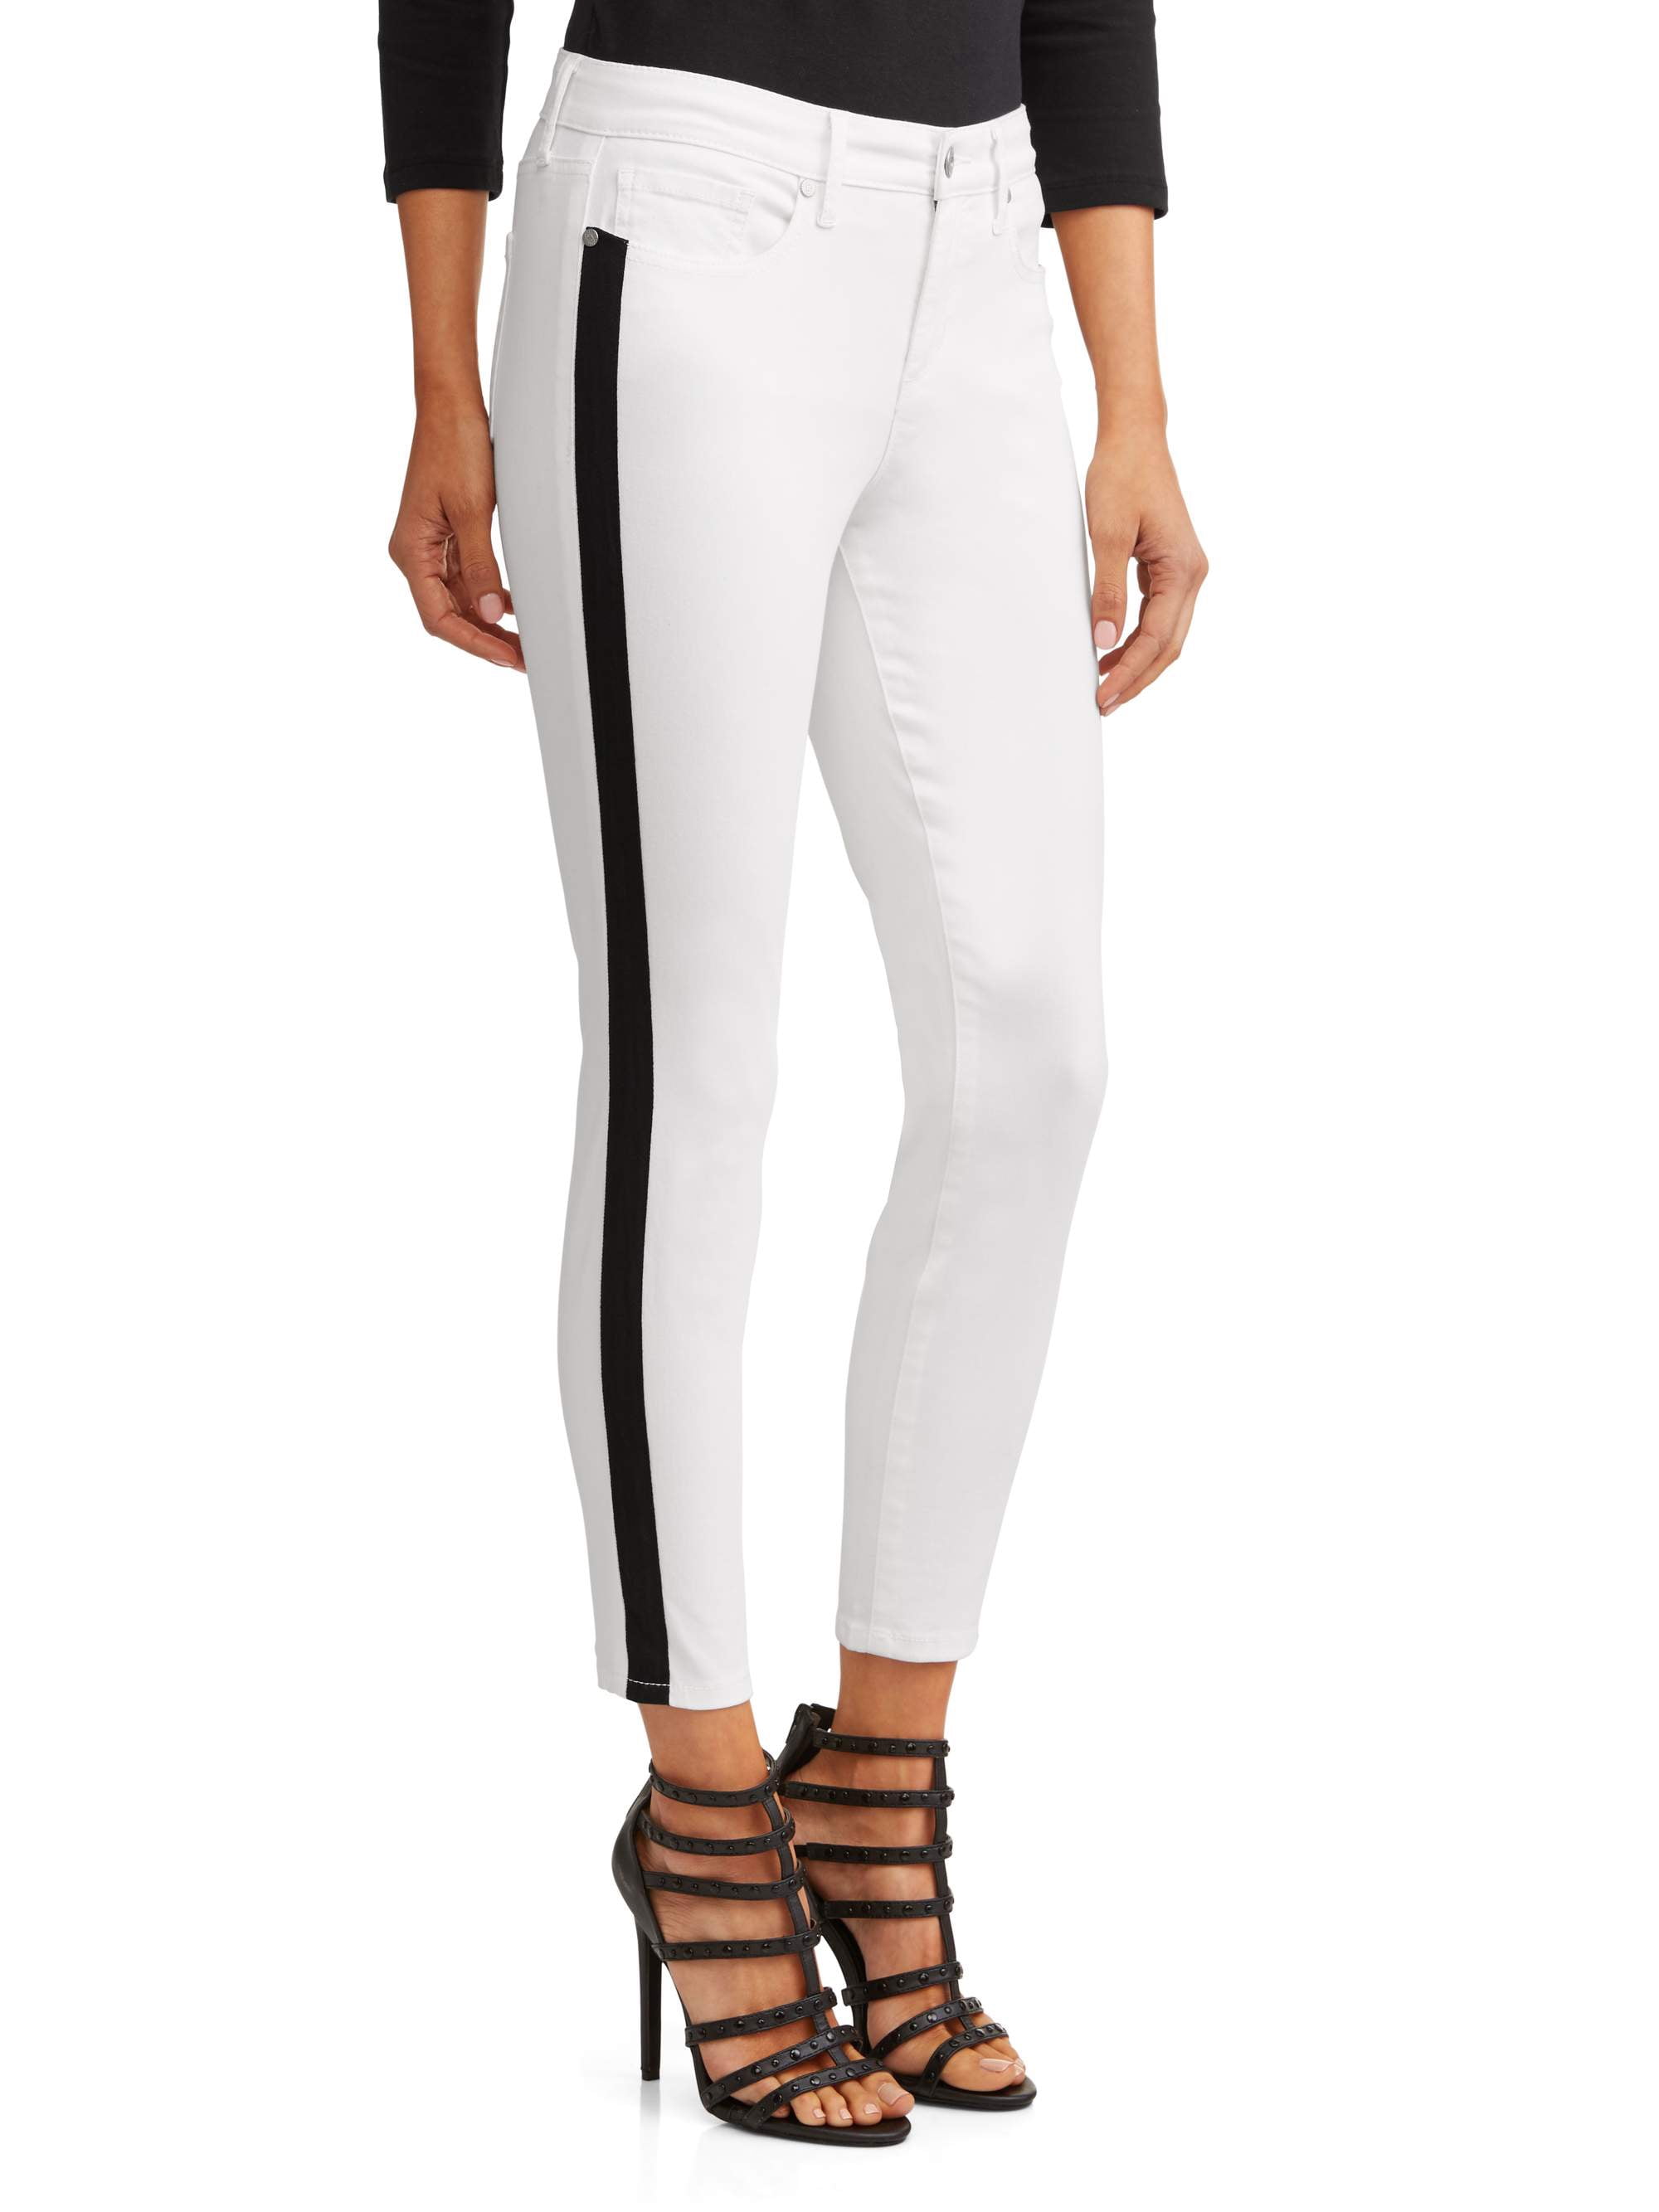 white jeans with stripe on side